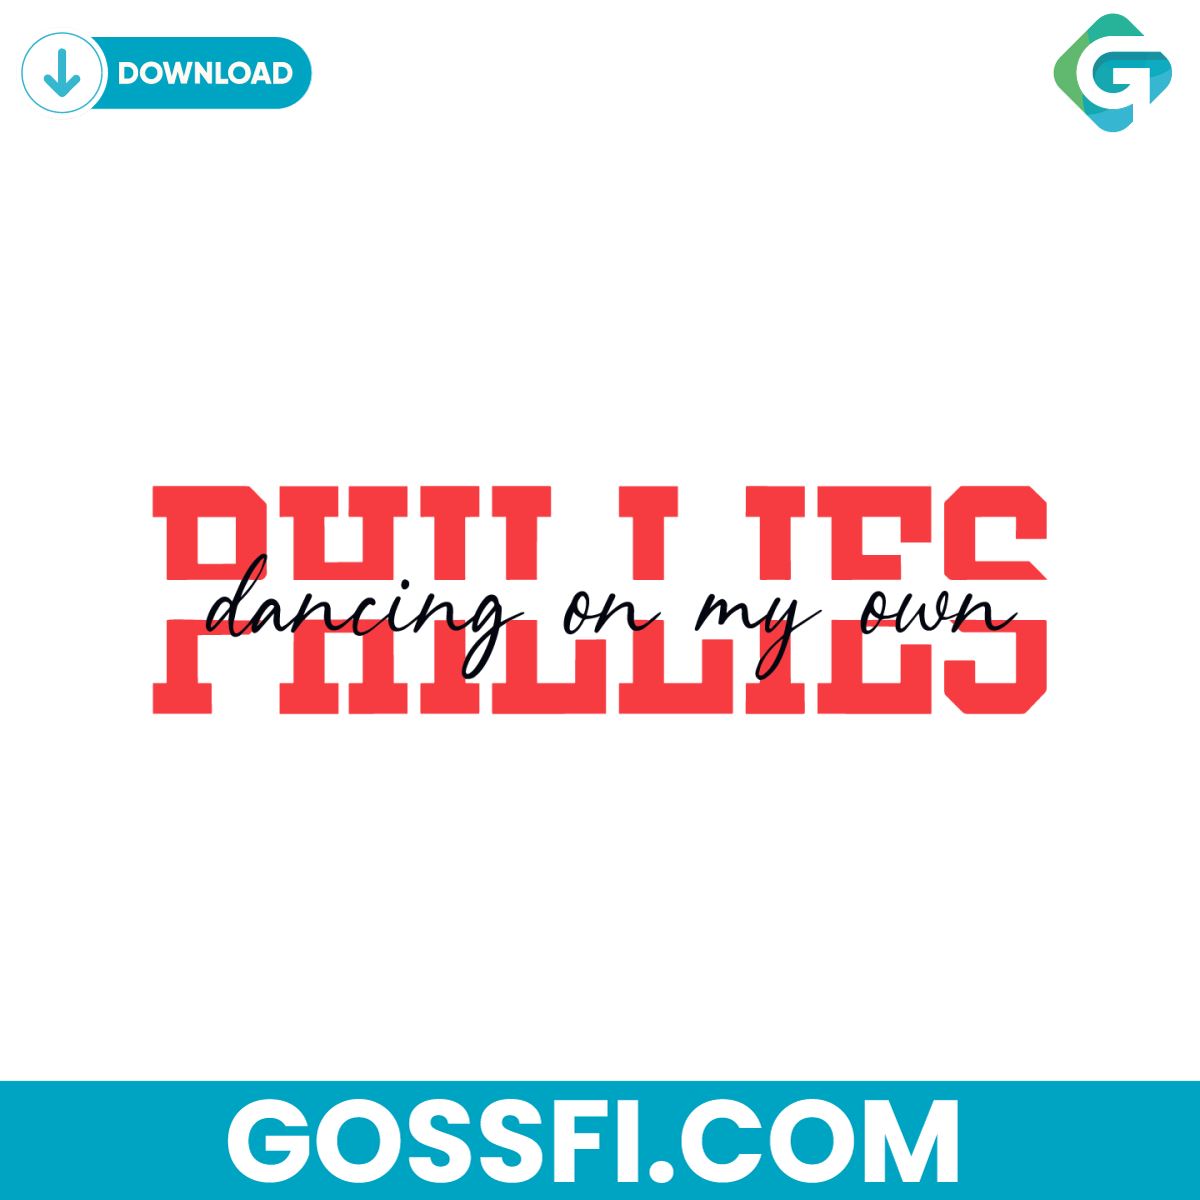 phillies-dancing-on-my-own-red-october-svg-file-for-cricut